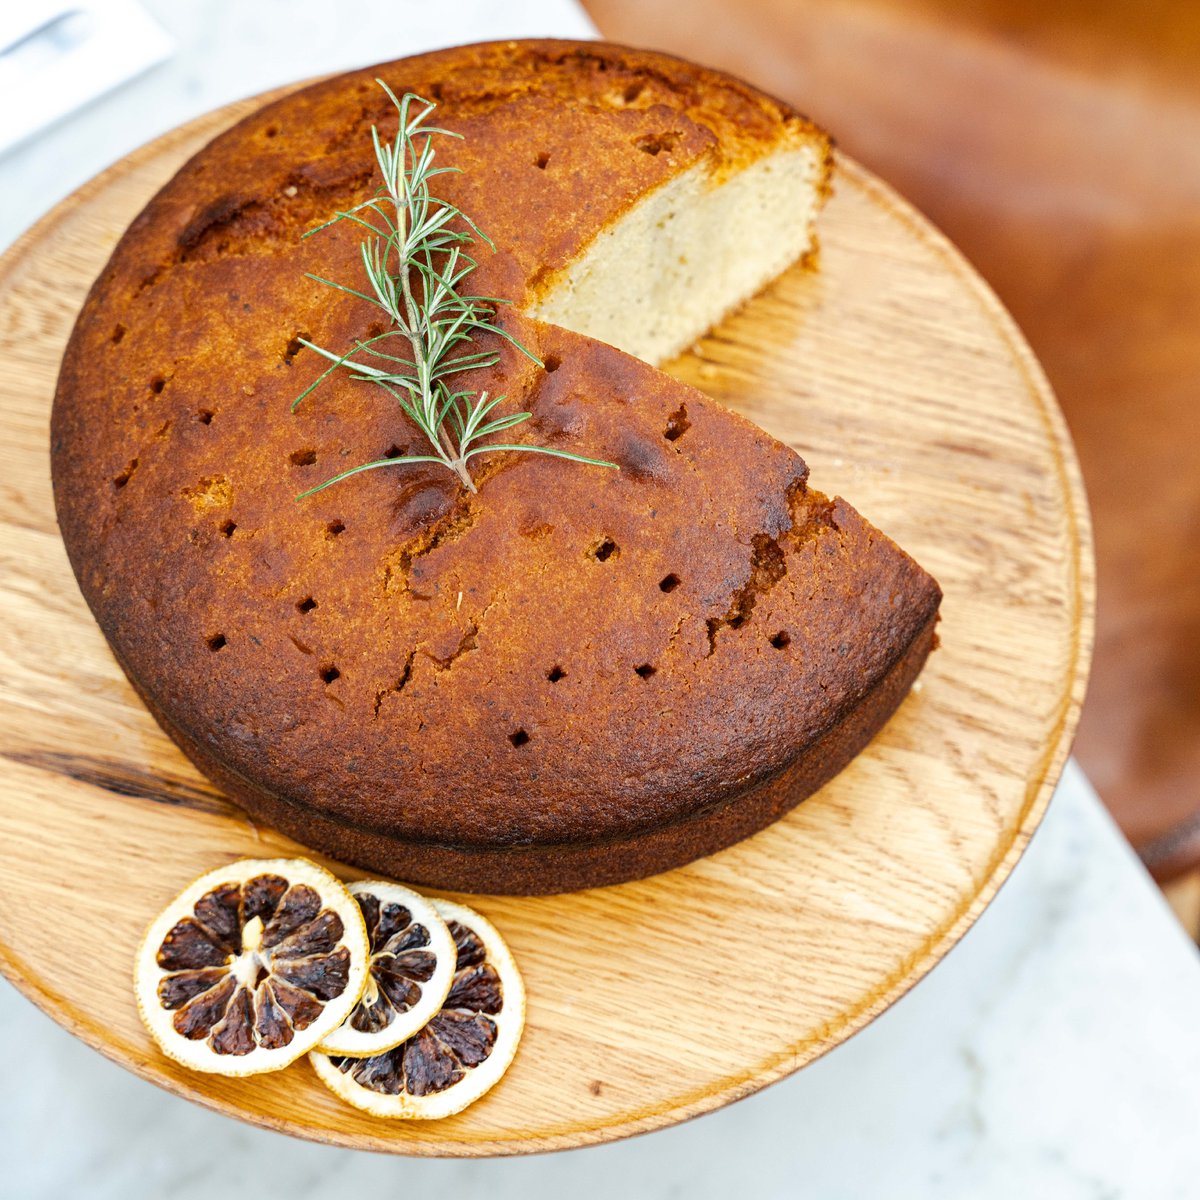 Lemon drizzle meets Madeira... our 'lemon & rosemary olive oil cake' offers an energising dose of the Mediterranean ☀️ In Sam's words, it's Gees' 'light and vibrant alternative to the traditional croissant!' Join us for brunch this weekend: eu1.hubs.ly/H08HHsp0